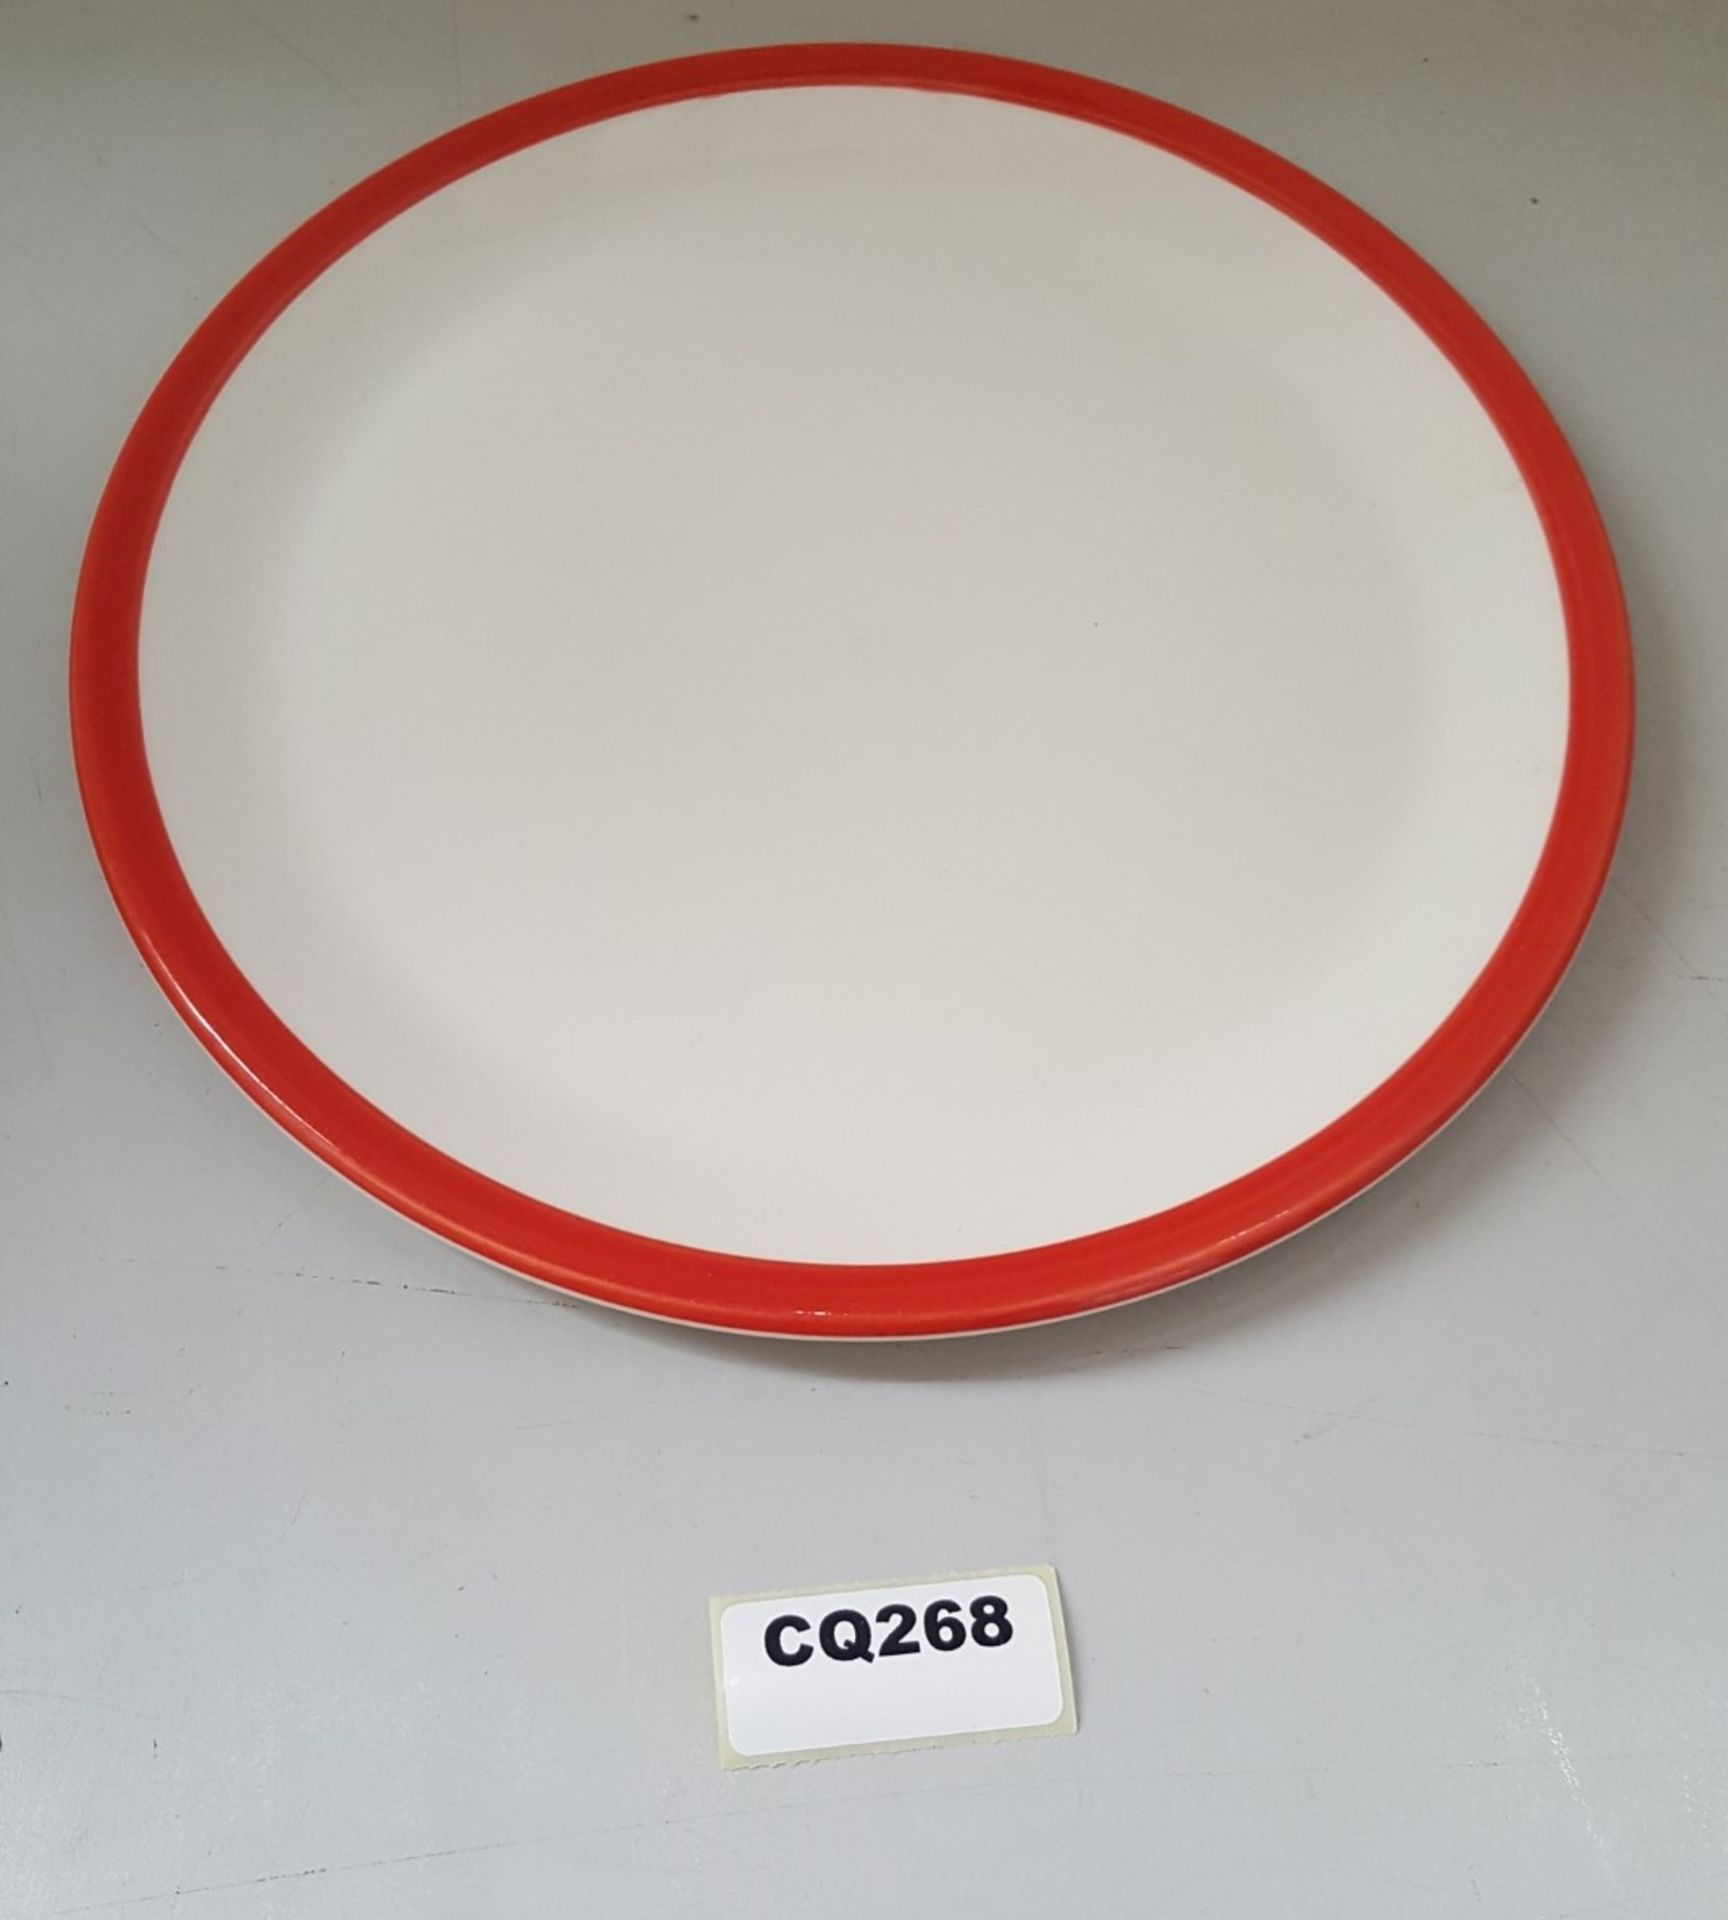 22 x Steelite Coupe Plates White With Red Outline Egde 27.5CM - Ref CQ268 - Image 2 of 4